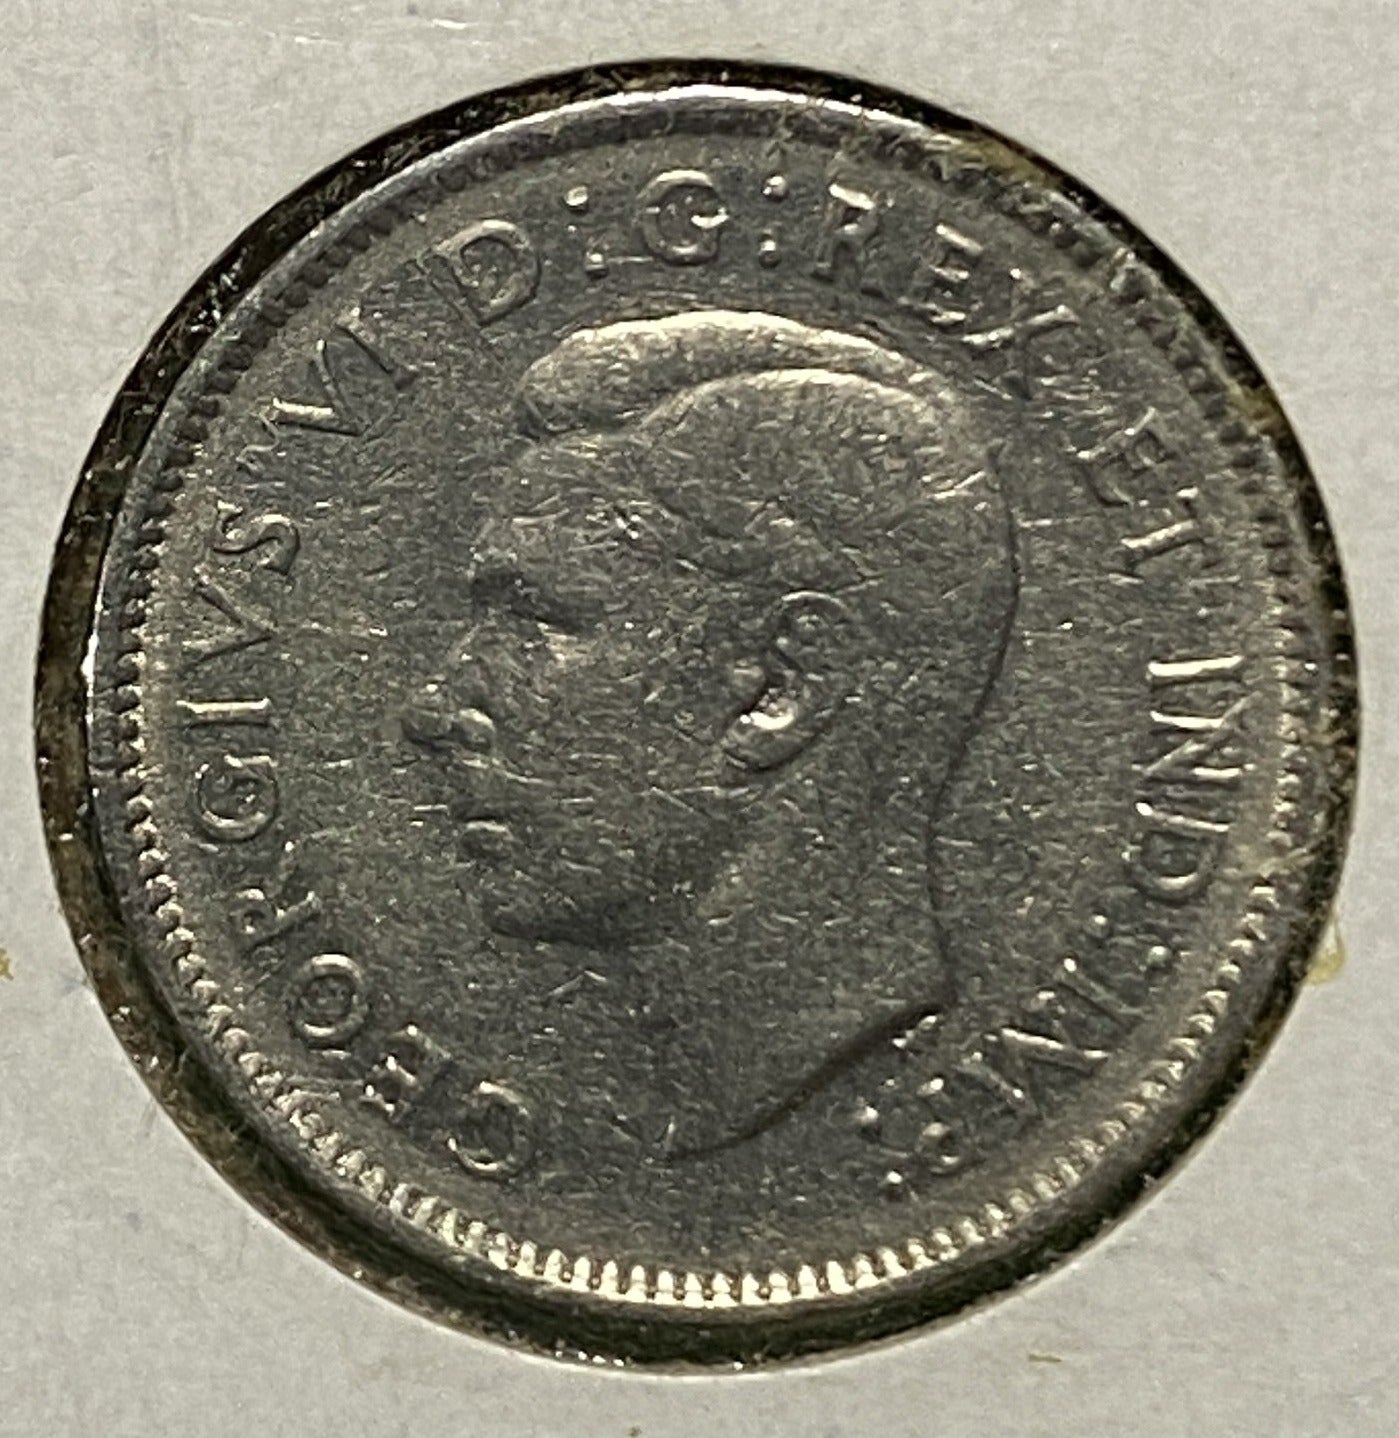 CANADIAN 1937 DOT  NICKEL 5 CENTS COIN KING GEORGE VI (VG / F)